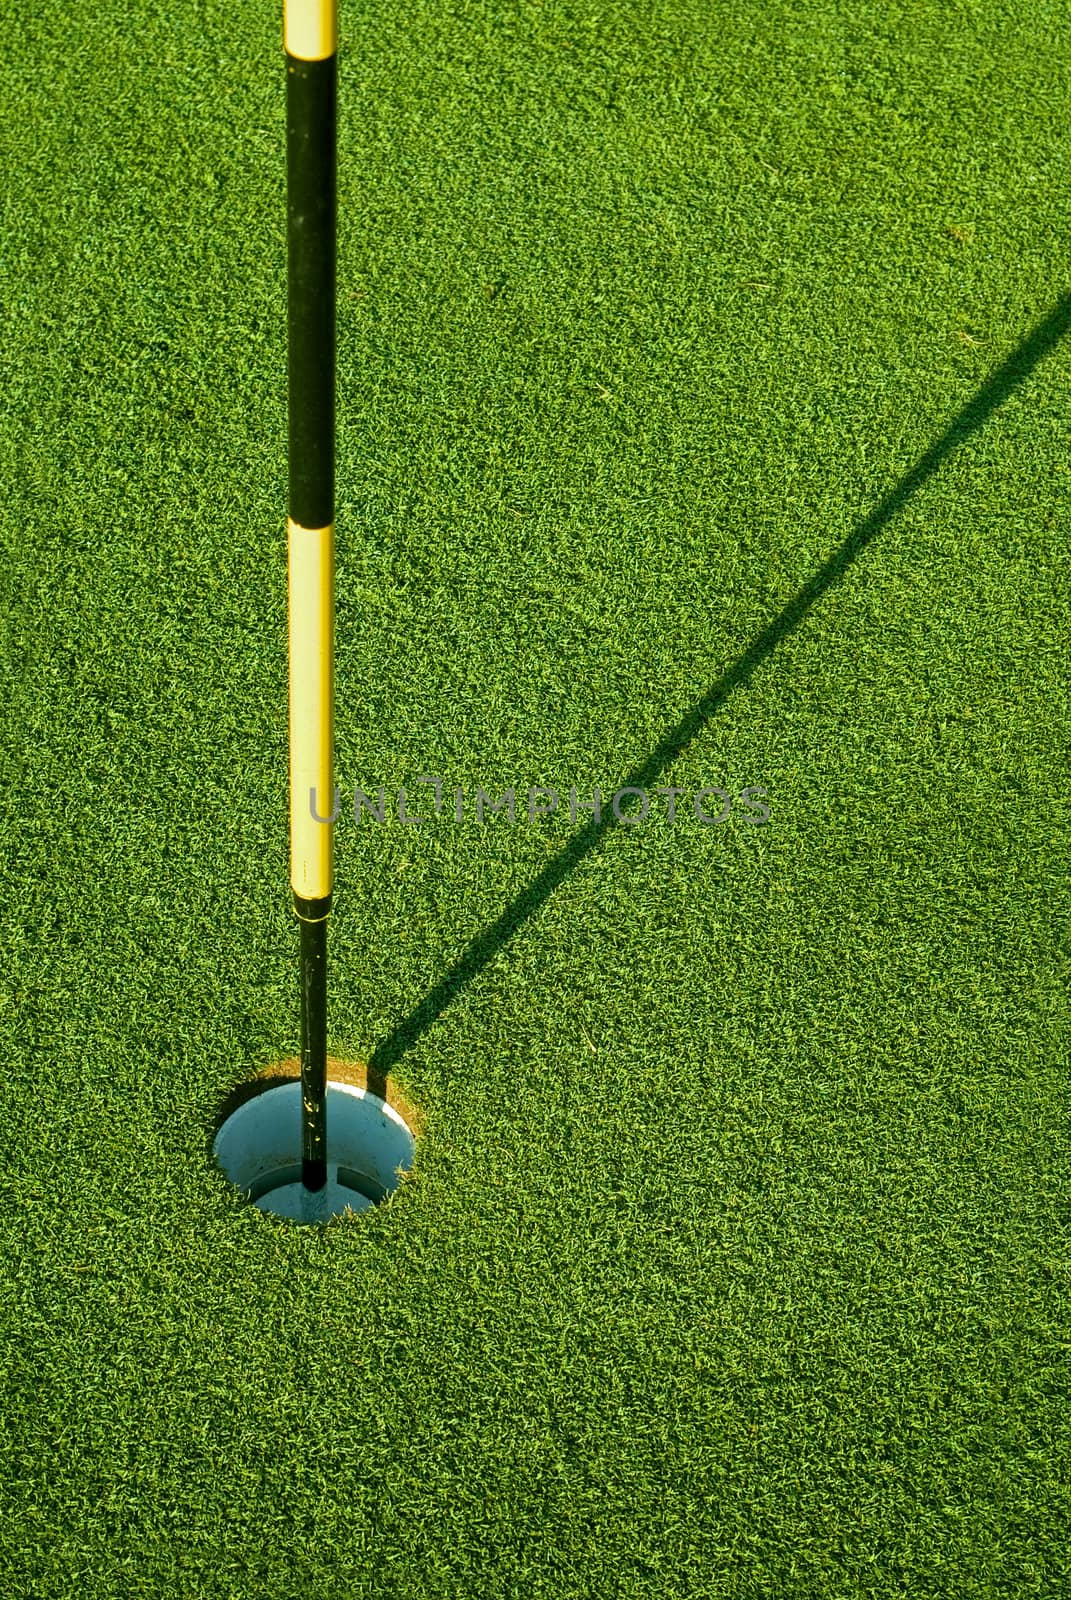 Striped golf flag in green hole with morning shadow on grass